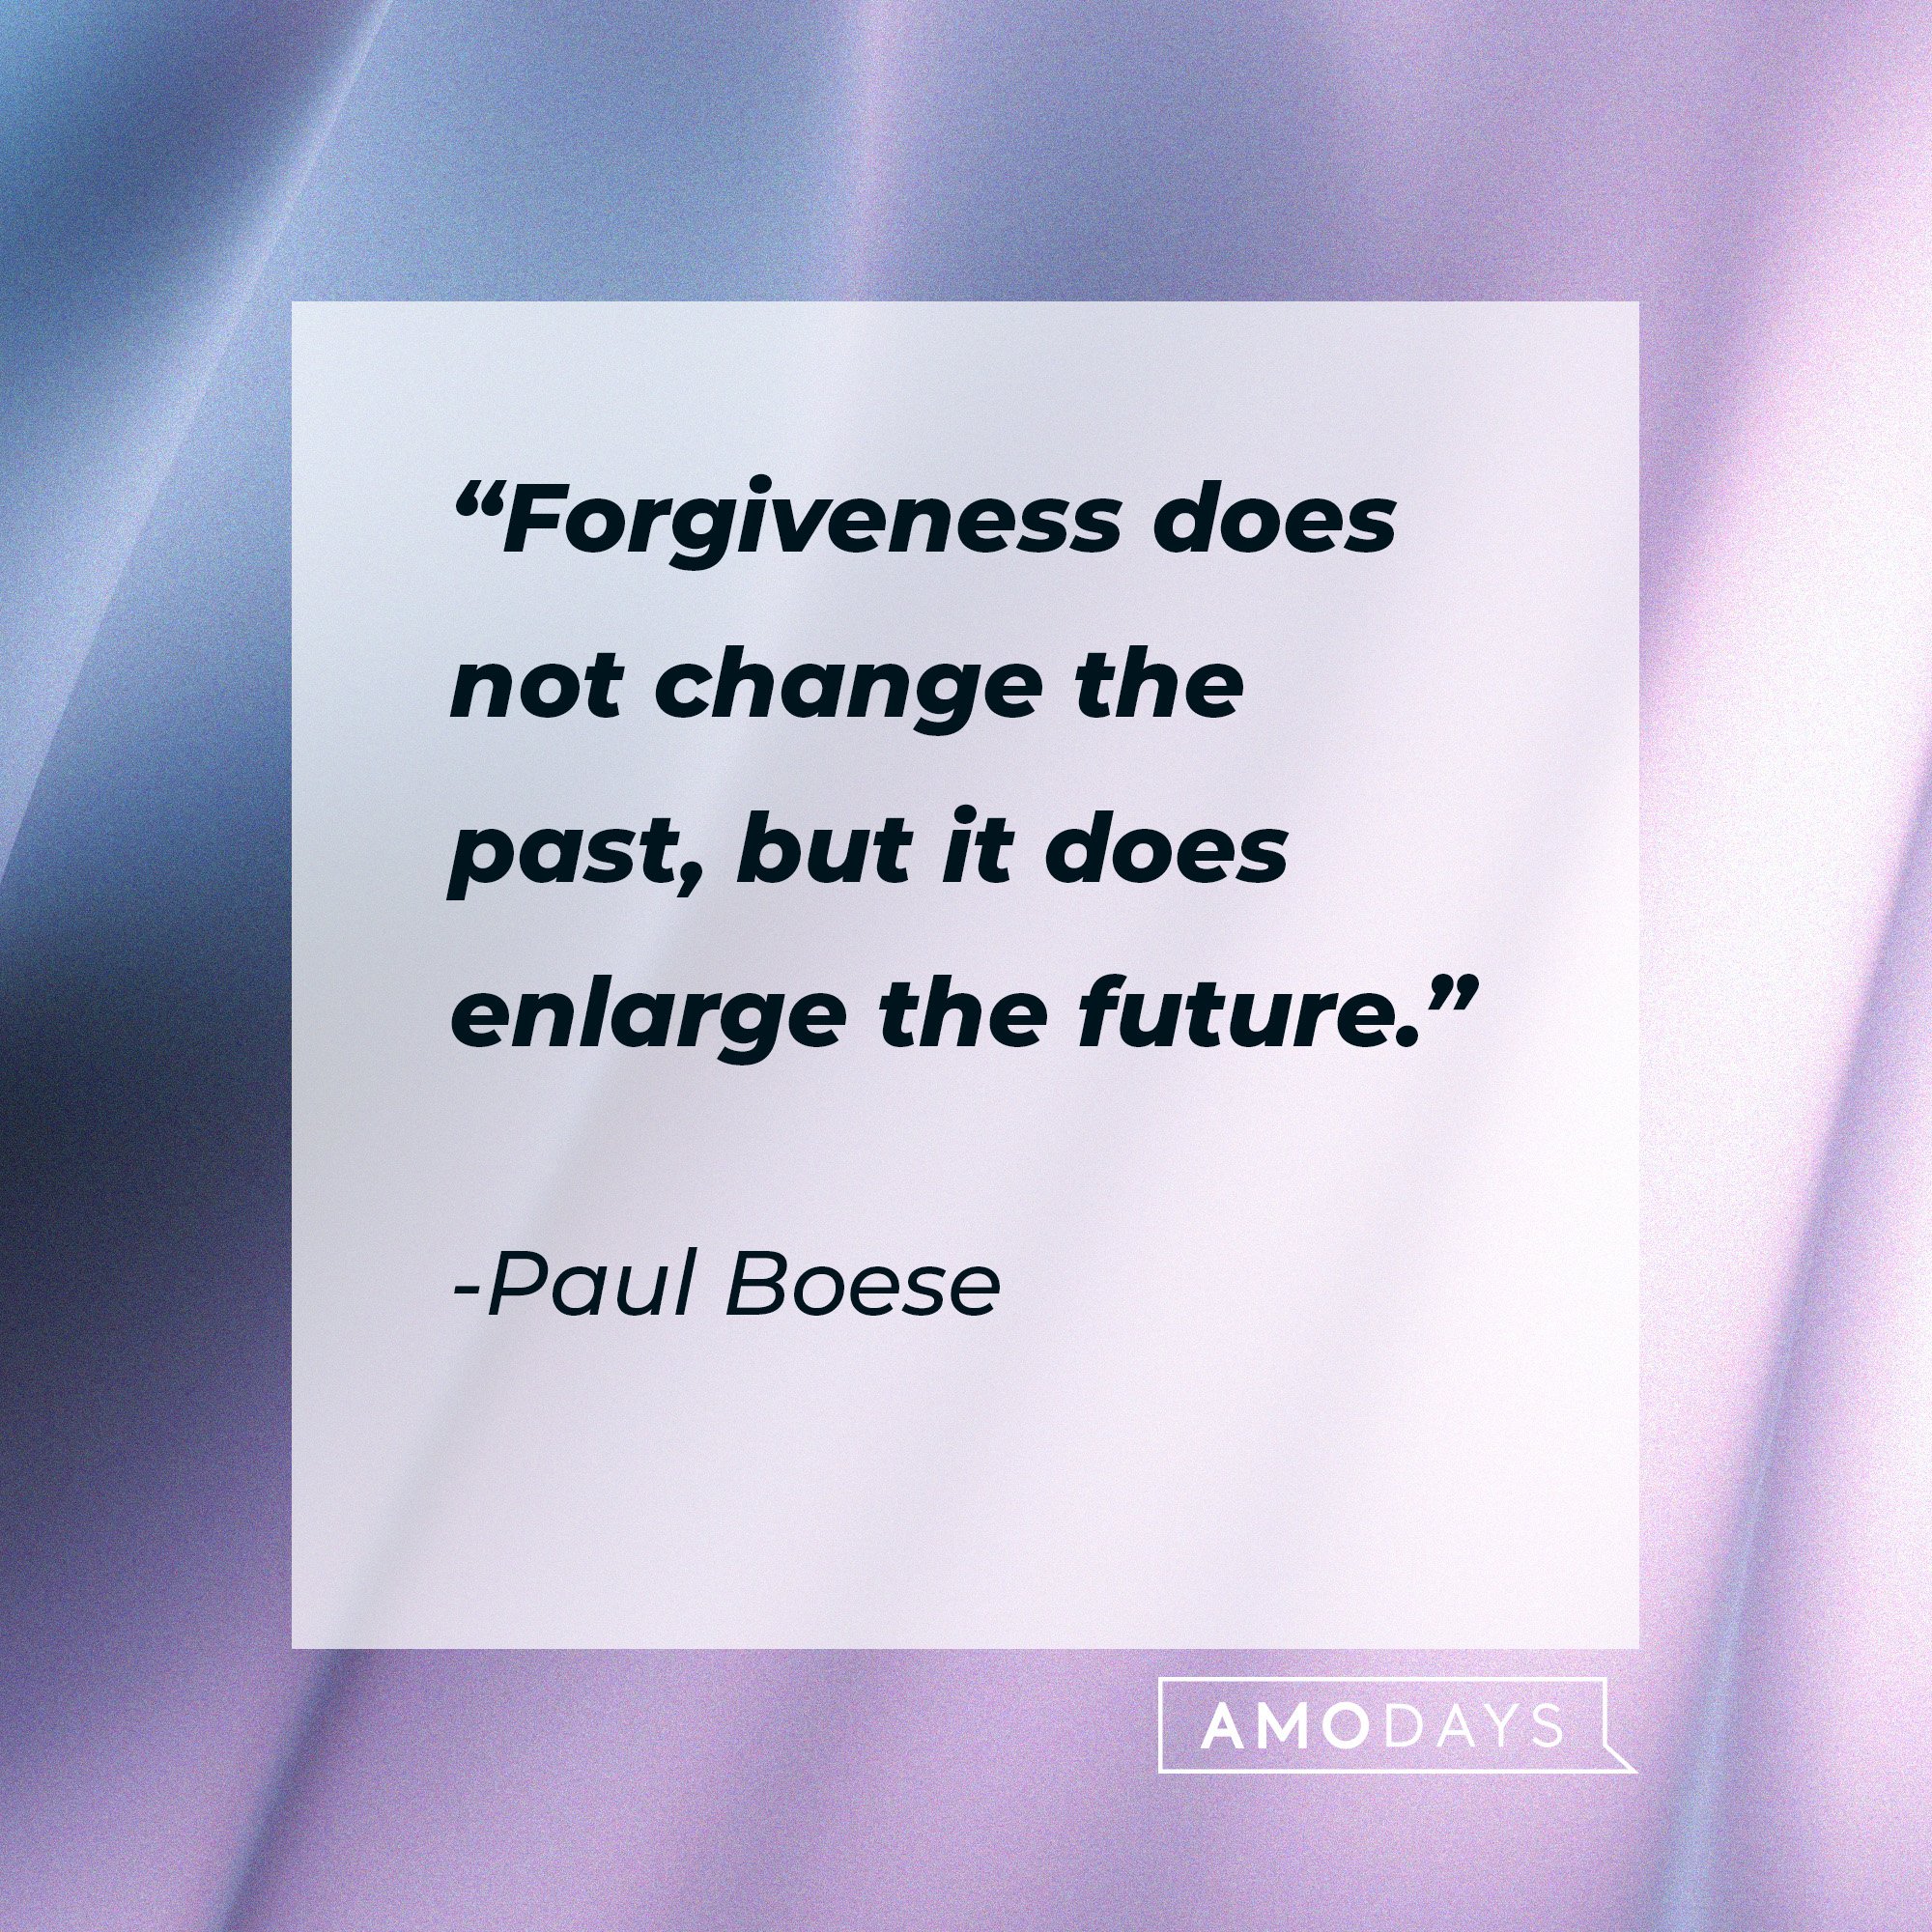 Paul Boese: “Forgiveness does not change the past, but it does enlarge the future.” |Image: AmoDays